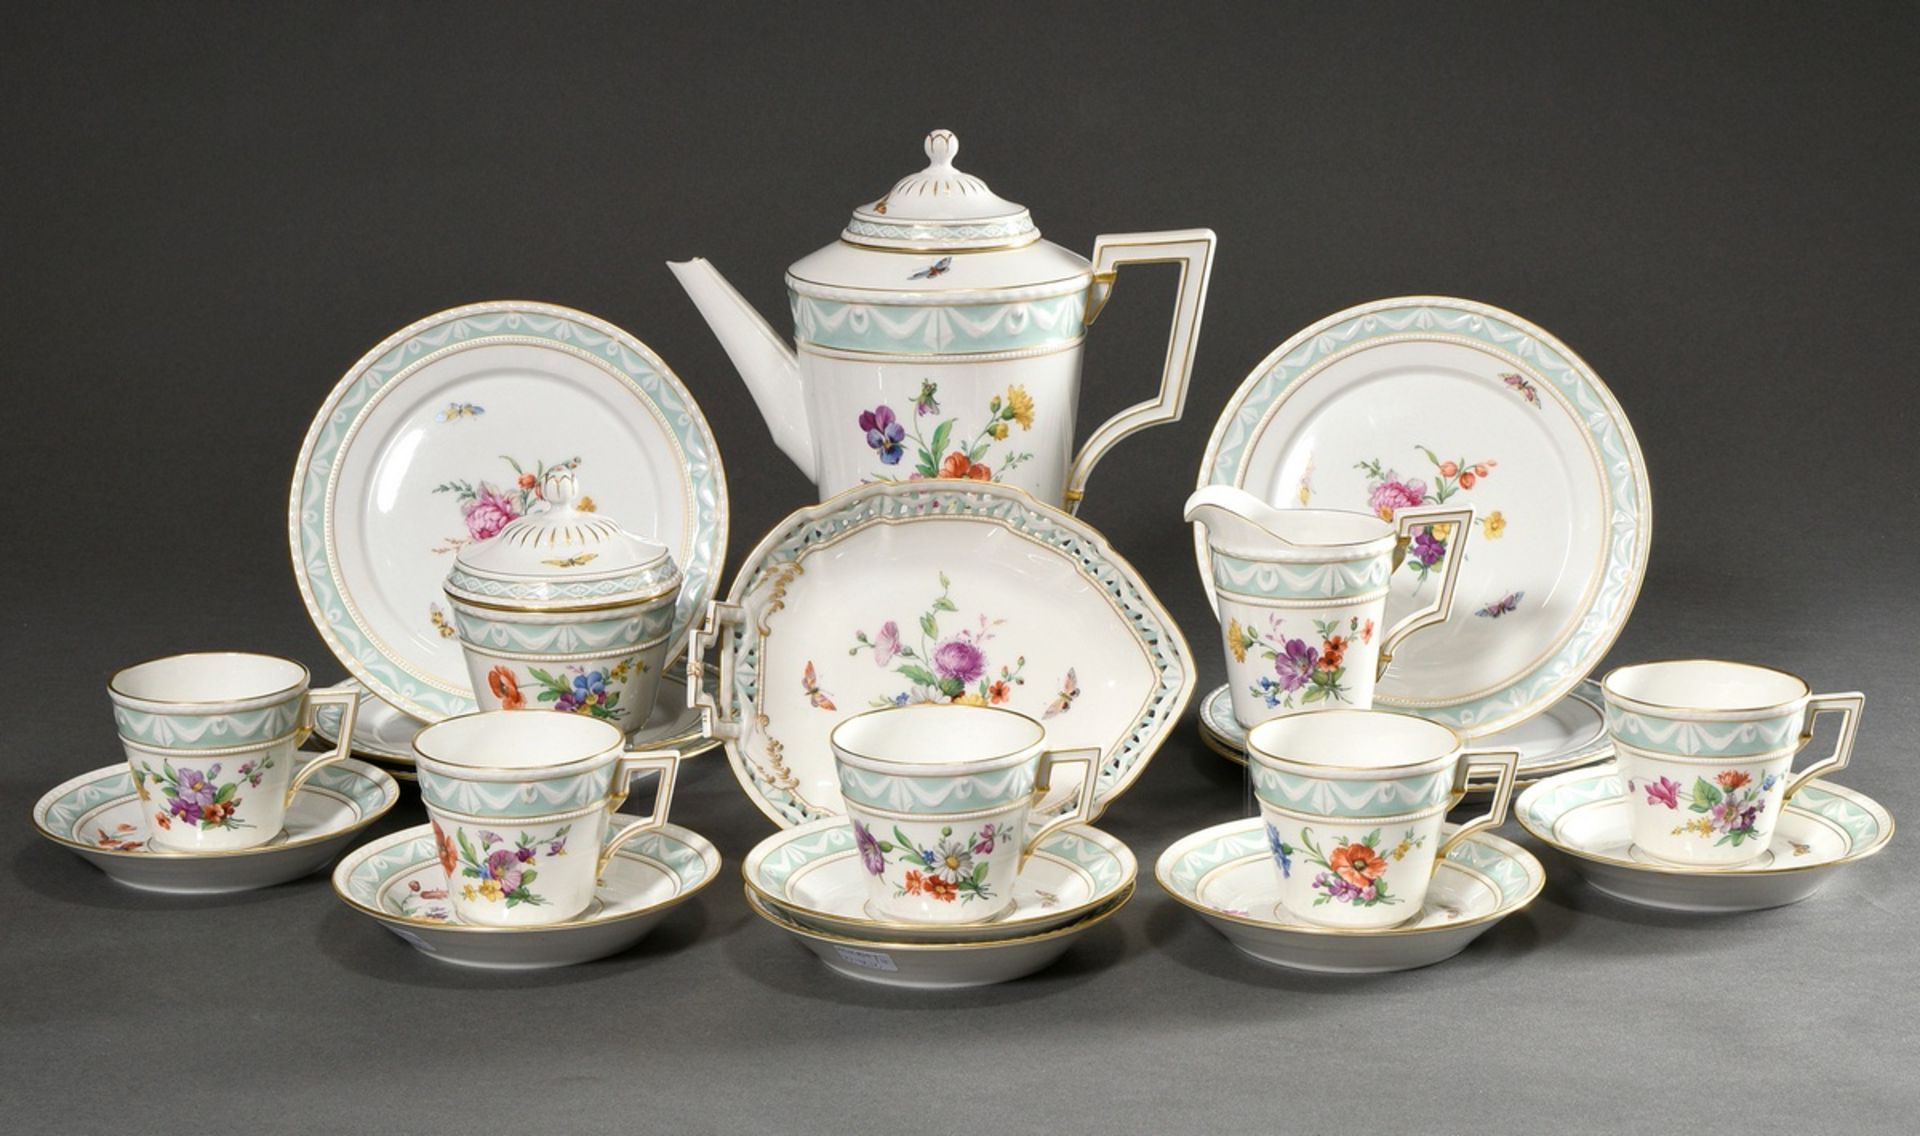 15 Pieces KPM coffee service "Kurland" with flowers and insects, gold staffage and turquoise frieze - Image 2 of 10